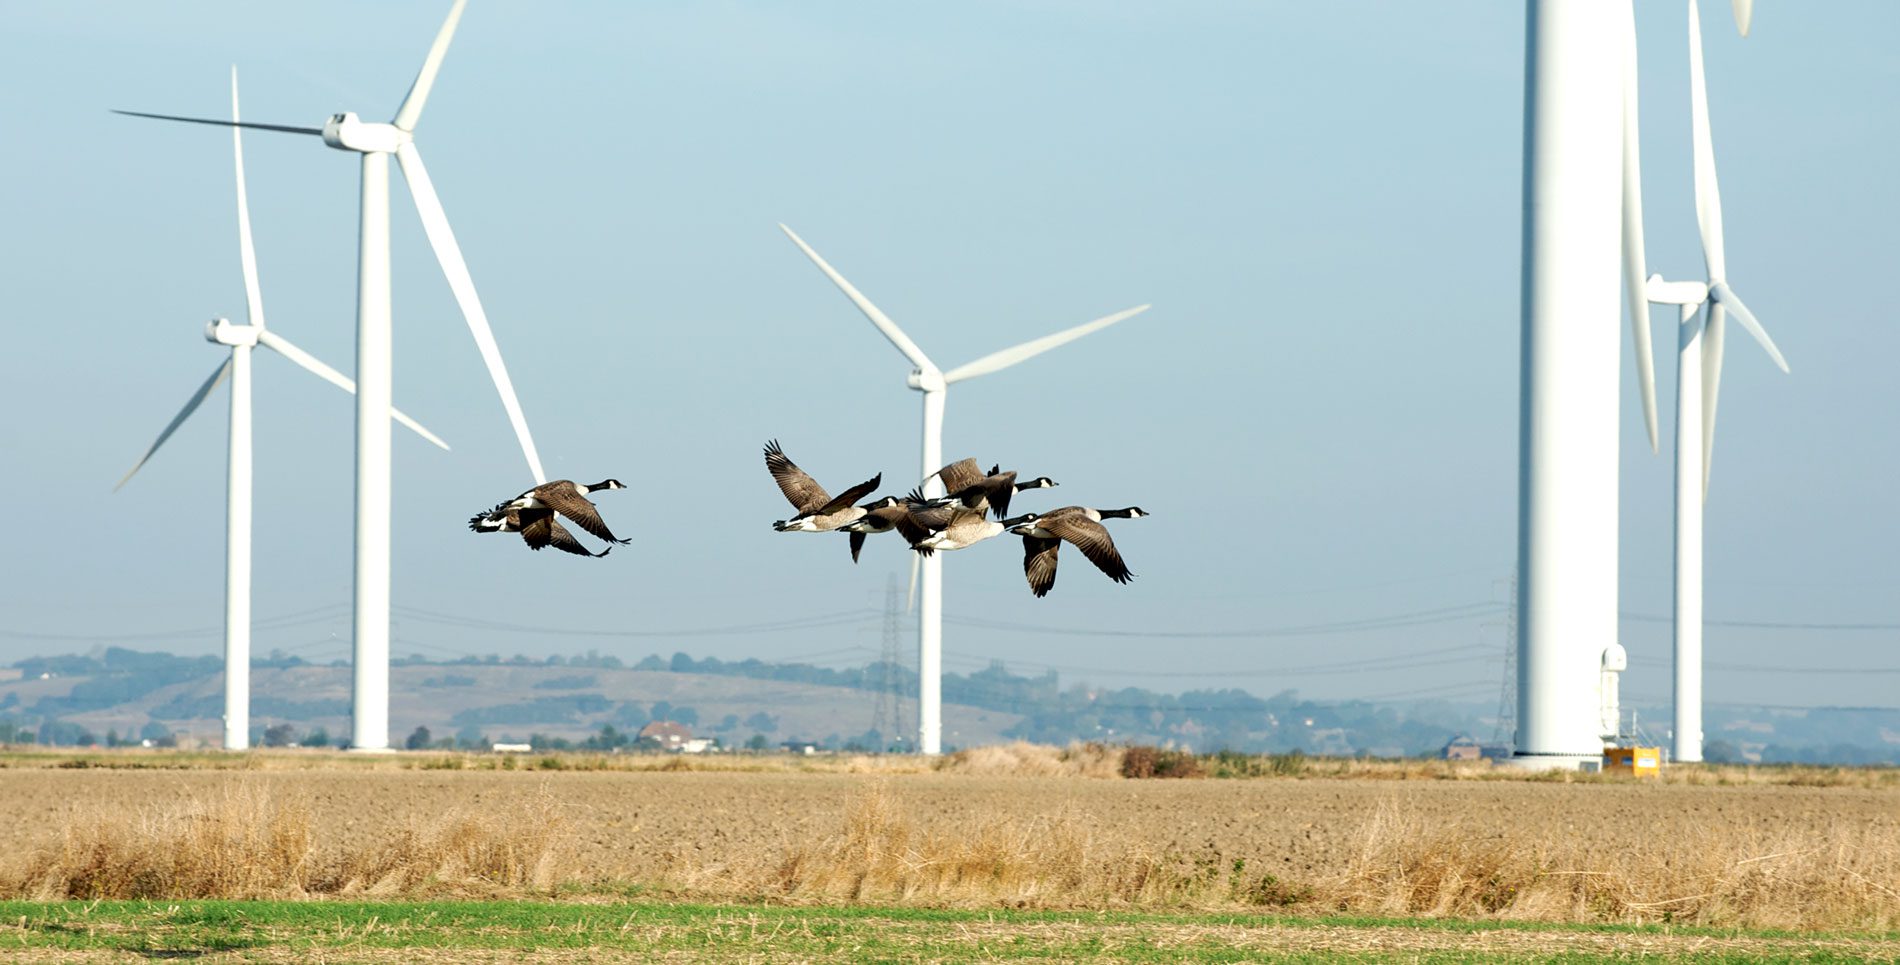 Canada Geese fly by a turbine. Photo by Johnny Greig/iStock